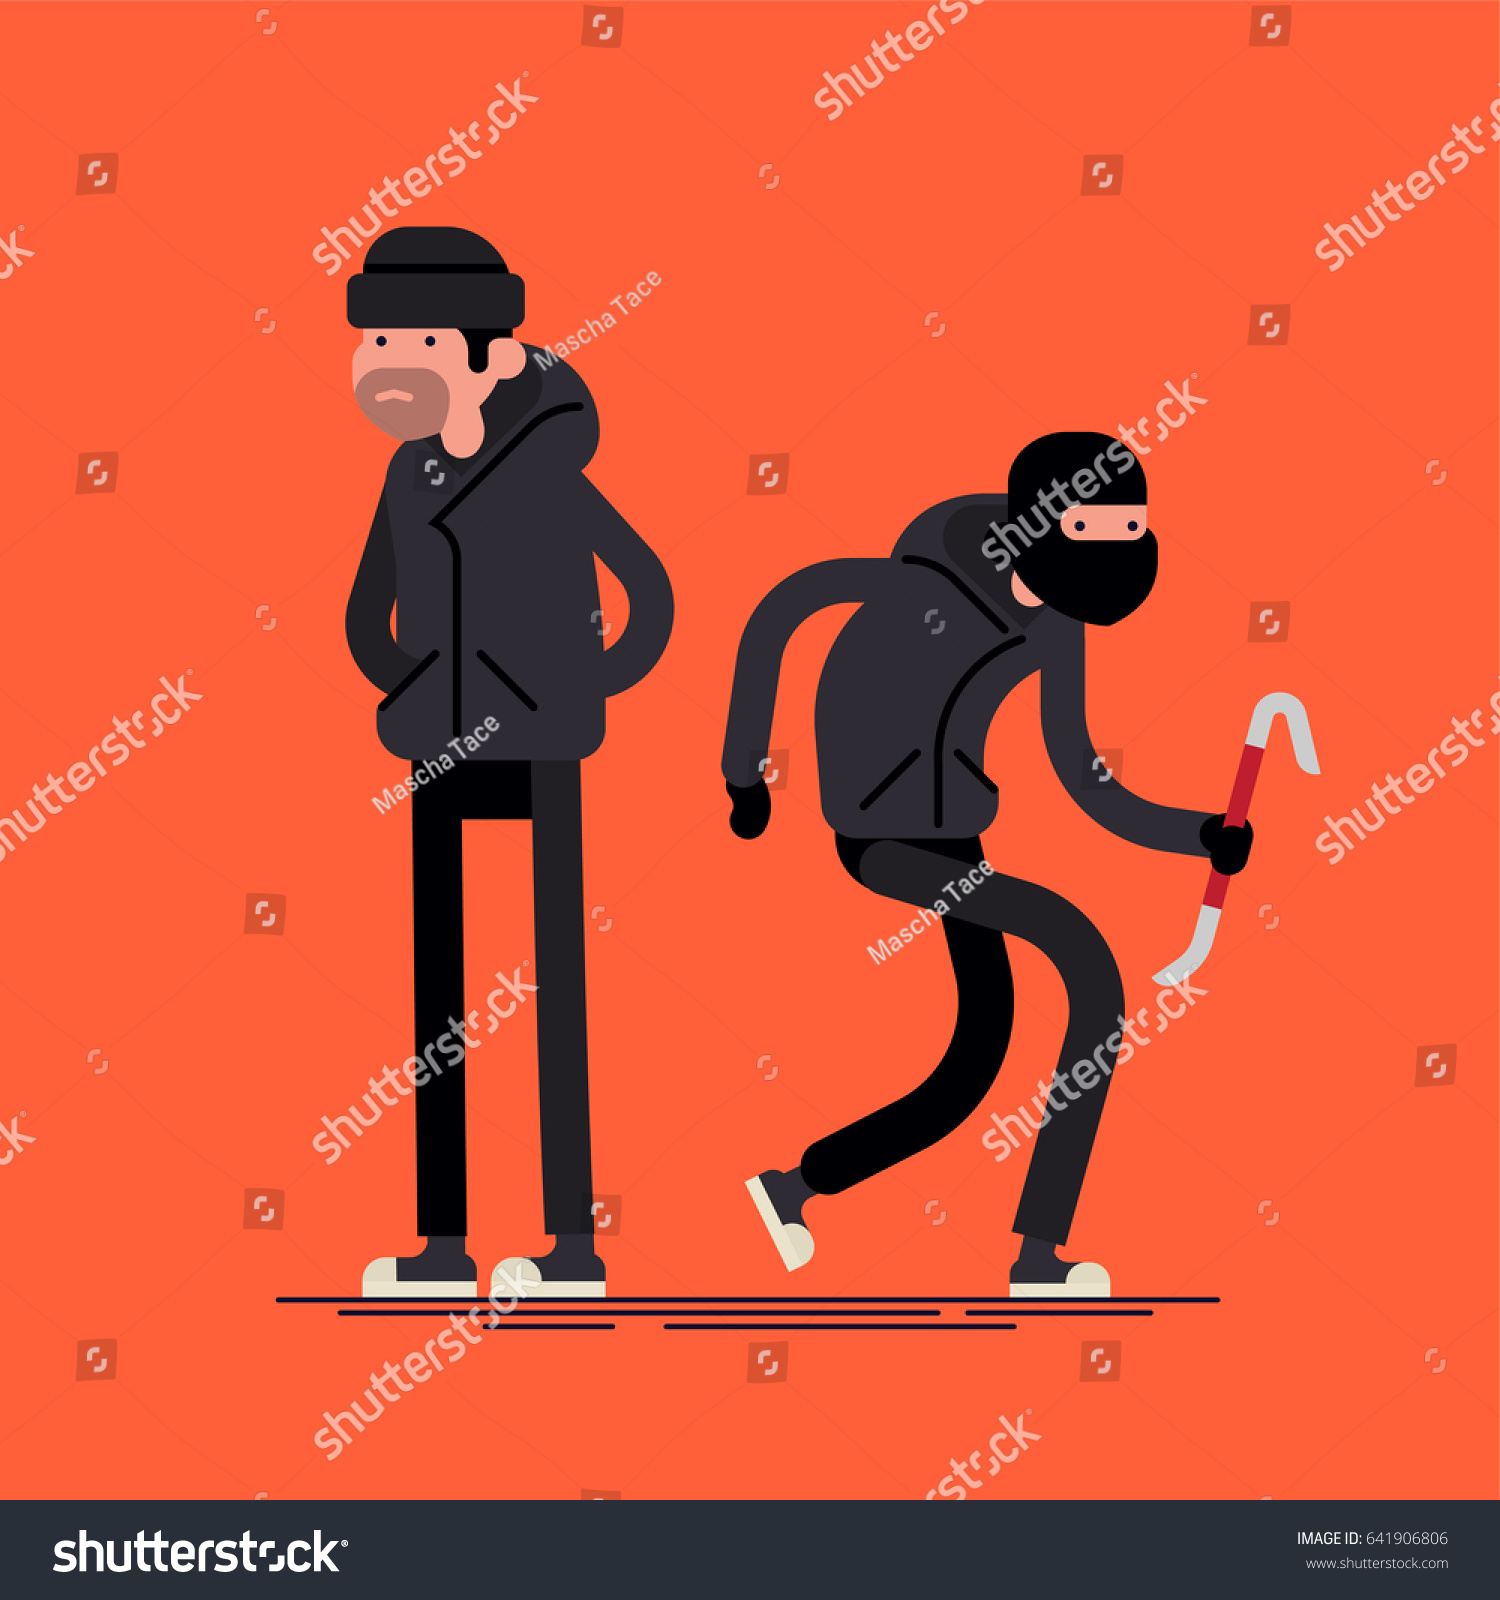 SVG of Cool vector flat character design on burglar. Criminal, thief or robber standing and crouching with balaclava mask and crowbar. Sneaking and standing unfriendly outlaw male person svg